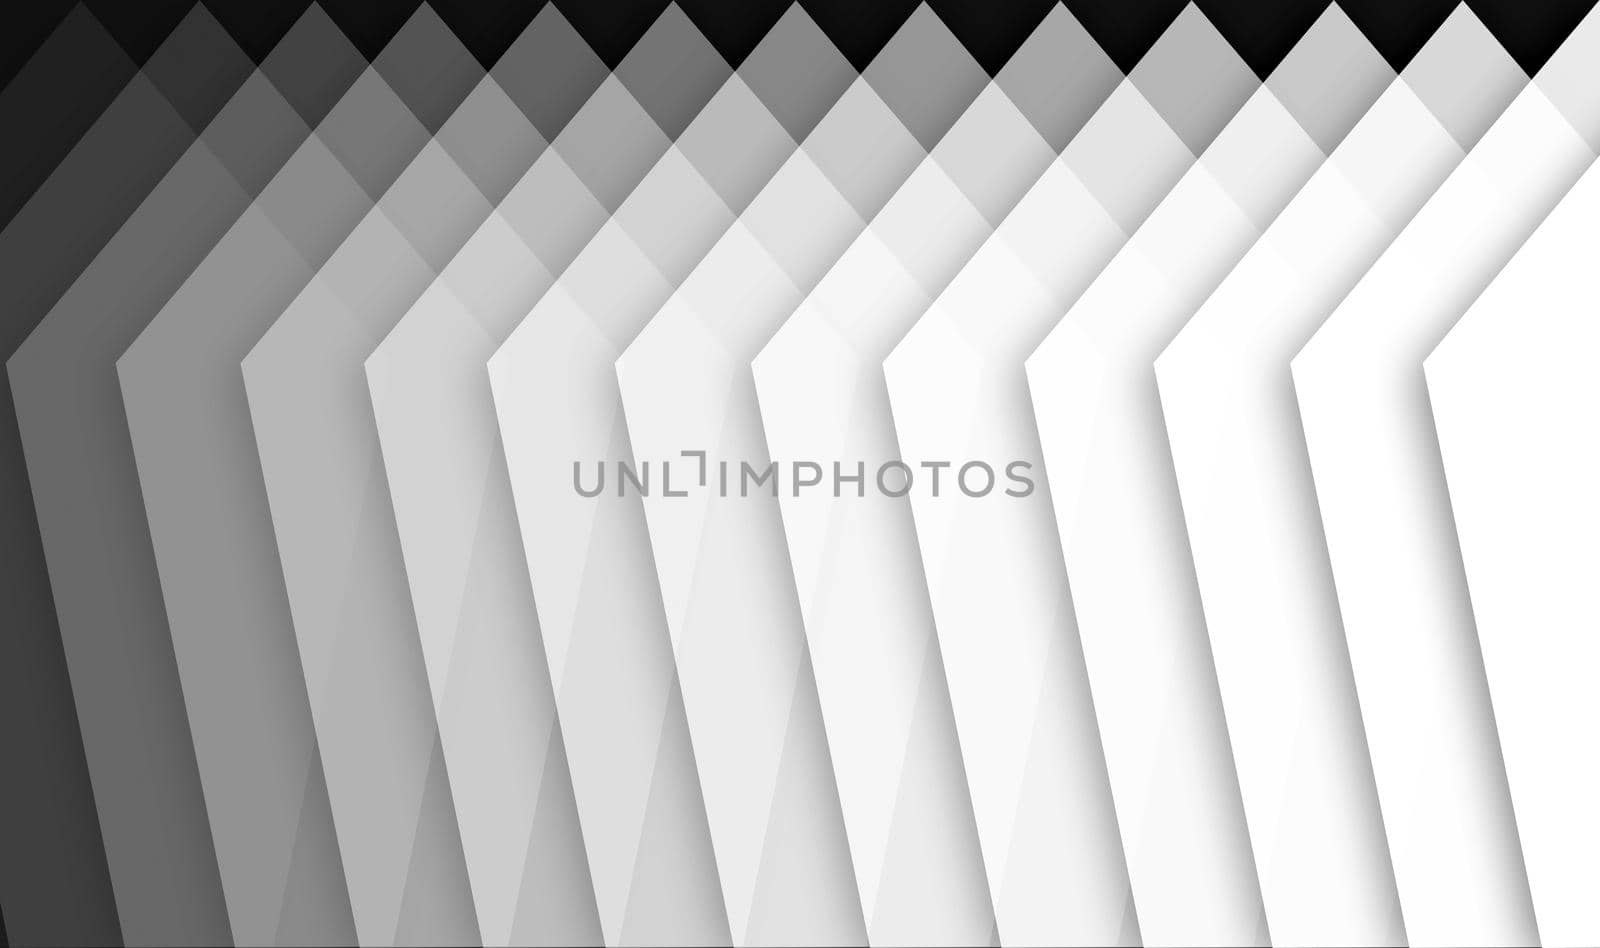 design template showing abstract gradient of white and black from black to white, shapes are one pentagon position at equal distance with 7% of opacity down from black to white